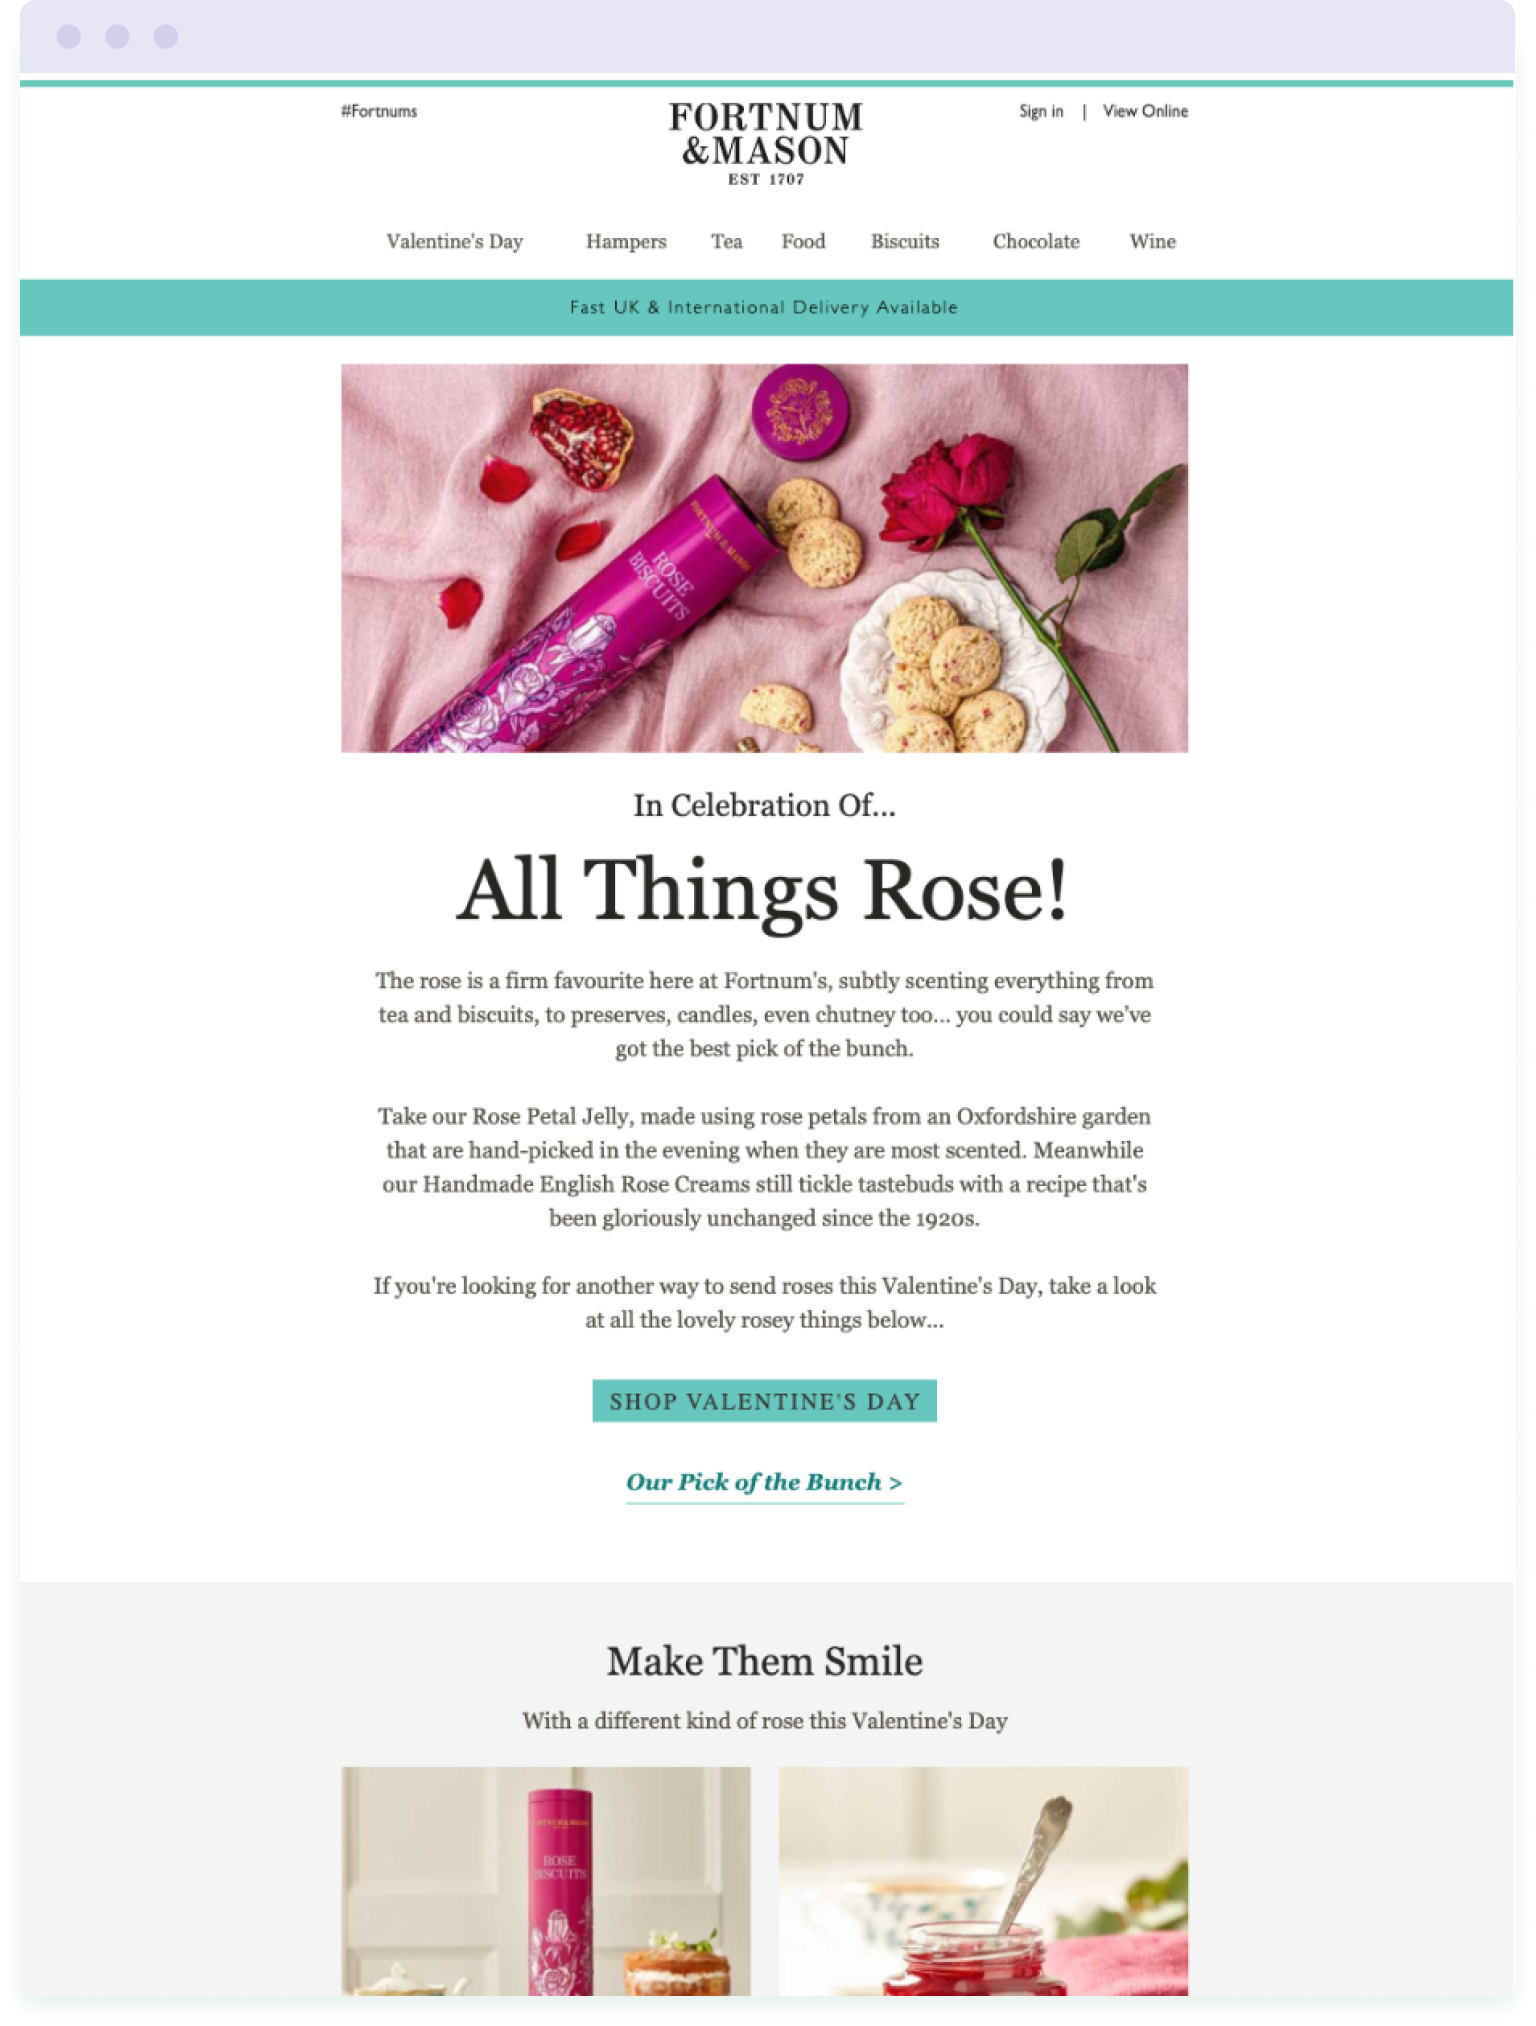 Valentine's day email from department store Fortnum and Mason